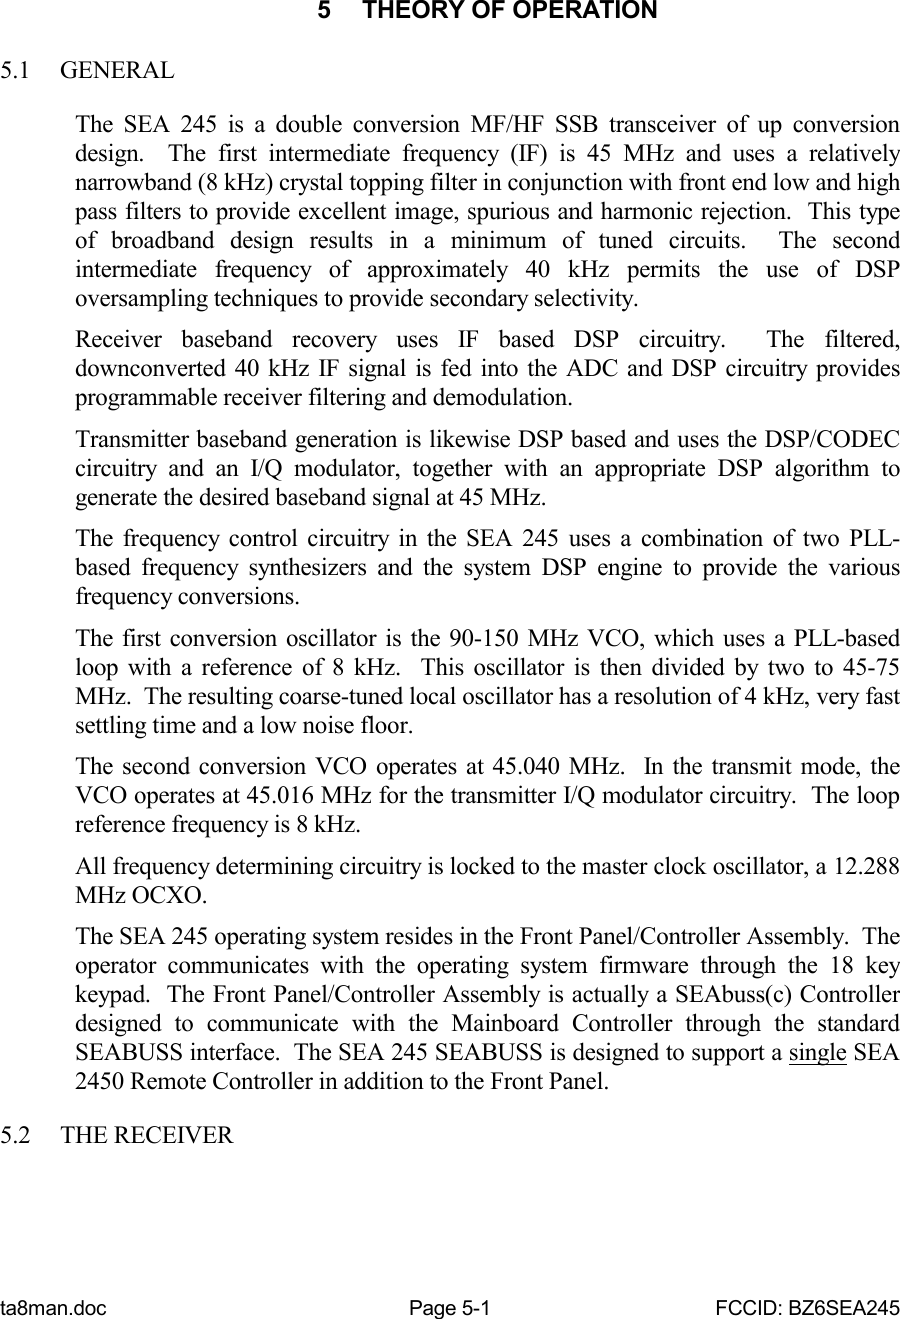 ta8man.doc Page 5-1 FCCID: BZ6SEA2455  THEORY OF OPERATION5.1 GENERALThe SEA 245 is a double conversion MF/HF SSB transceiver of up conversiondesign.  The first intermediate frequency (IF) is 45 MHz and uses a relativelynarrowband (8 kHz) crystal topping filter in conjunction with front end low and highpass filters to provide excellent image, spurious and harmonic rejection.  This typeof broadband design results in a minimum of tuned circuits.  The secondintermediate frequency of approximately 40 kHz permits the use of DSPoversampling techniques to provide secondary selectivity.Receiver baseband recovery uses IF based DSP circuitry.  The filtered,downconverted 40 kHz IF signal is fed into the ADC and DSP circuitry providesprogrammable receiver filtering and demodulation.Transmitter baseband generation is likewise DSP based and uses the DSP/CODECcircuitry and an I/Q modulator, together with an appropriate DSP algorithm togenerate the desired baseband signal at 45 MHz.The frequency control circuitry in the SEA 245 uses a combination of two PLL-based frequency synthesizers and the system DSP engine to provide the variousfrequency conversions.The first conversion oscillator is the 90-150 MHz VCO, which uses a PLL-basedloop with a reference of 8 kHz.  This oscillator is then divided by two to 45-75MHz.  The resulting coarse-tuned local oscillator has a resolution of 4 kHz, very fastsettling time and a low noise floor.The second conversion VCO operates at 45.040 MHz.  In the transmit mode, theVCO operates at 45.016 MHz for the transmitter I/Q modulator circuitry.  The loopreference frequency is 8 kHz.All frequency determining circuitry is locked to the master clock oscillator, a 12.288MHz OCXO.The SEA 245 operating system resides in the Front Panel/Controller Assembly.  Theoperator communicates with the operating system firmware through the 18 keykeypad.  The Front Panel/Controller Assembly is actually a SEAbuss(c) Controllerdesigned to communicate with the Mainboard Controller through the standardSEABUSS interface.  The SEA 245 SEABUSS is designed to support a single SEA2450 Remote Controller in addition to the Front Panel.5.2 THE RECEIVER